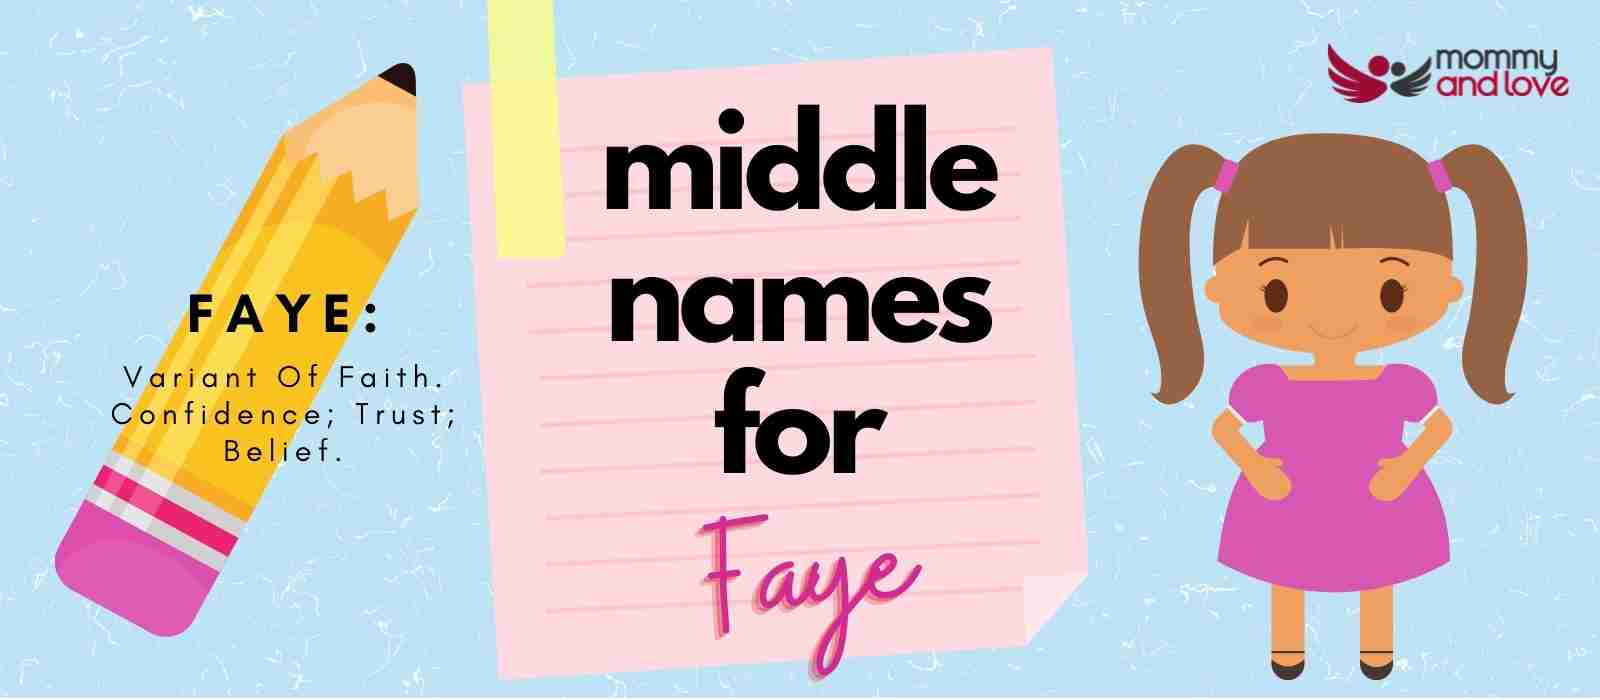 Middle Names for Faye